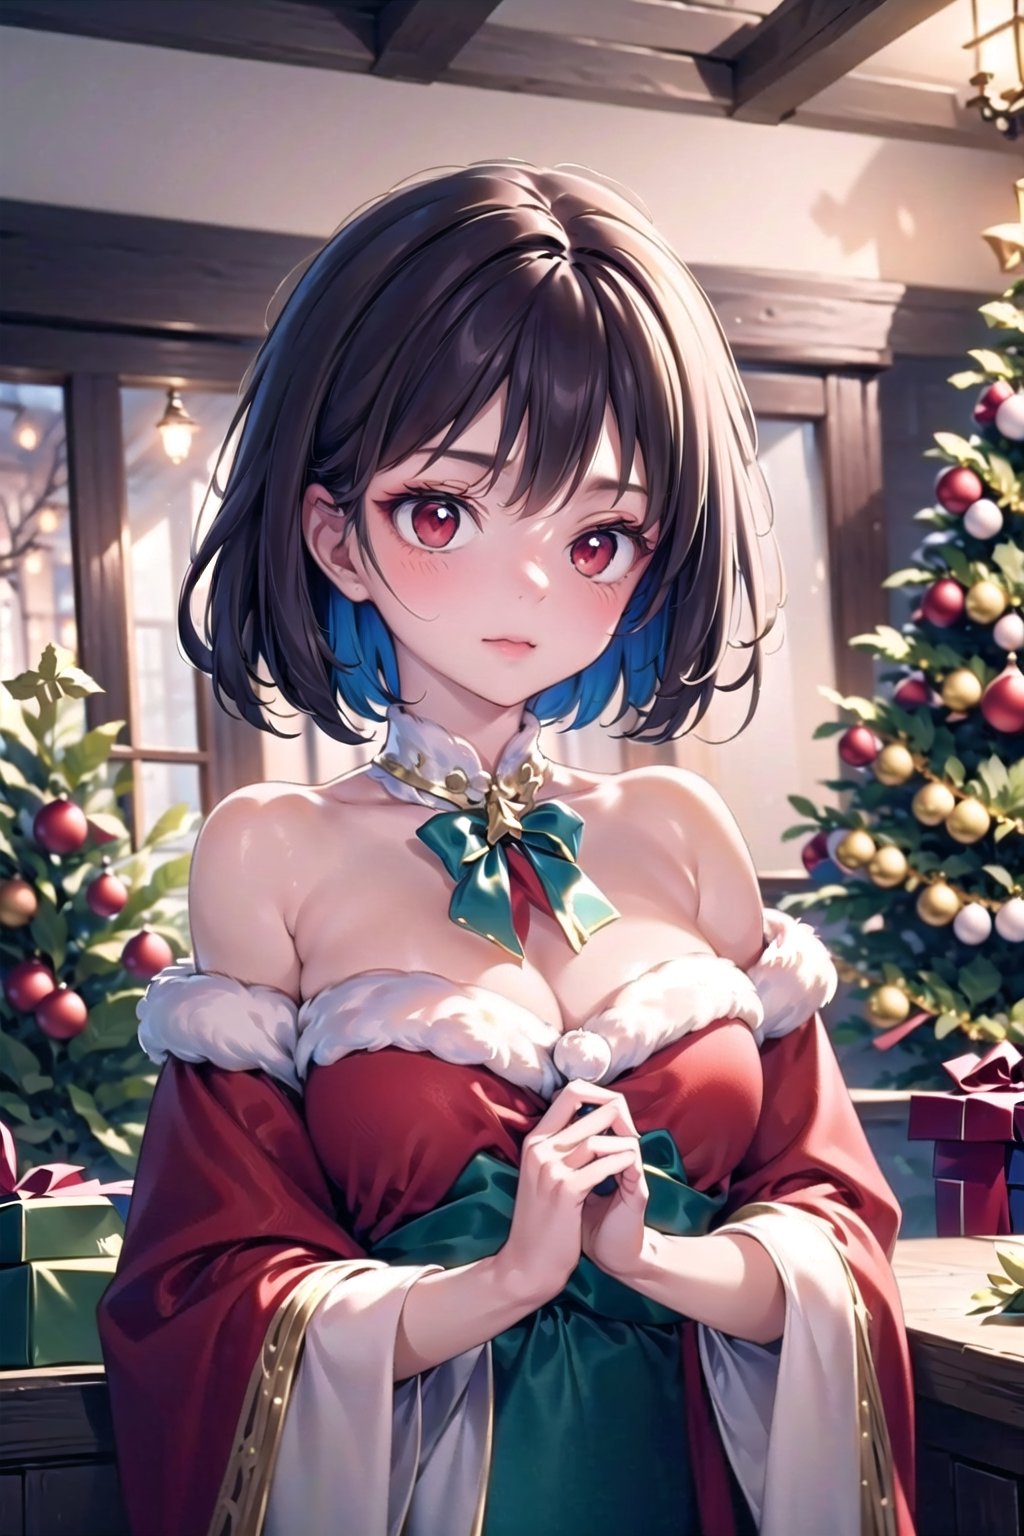 vibrant colors,  female,  masterpiece,  sharp focus,  best quality,  depth of field,  cinematic lighting,  ((solo,  adult woman)),  (illustration,  8k CG,  extremely detailed),  masterpiece,  ultra-detailed,  1 girl,  short hair,  mixed hair,  black hair,  red eyes, ,  in a festive nook adorned with mistletoe,  a girl stands beneath the holiday greenery,  creating a scene of enchanting merriment. The detailed illustration captures her in a moment of whimsy,  surrounded by the timeless tradition of the Christmas mistletoe,  dressed in festive attire suitable for the season,  the room is bathed in the soft glow of holiday lights,  creating an intimate and warm atmosphere. The mistletoe becomes a playful accent,  symbolizing the spirit of holiday gatherings and timeless traditions,  the illustration paints a charming portrait of a girl beneath the Christmas greenery,  where her presence and the festive mistletoe create an atmosphere of joy,  anticipation,  and the promise of holiday magic,,,Christmas